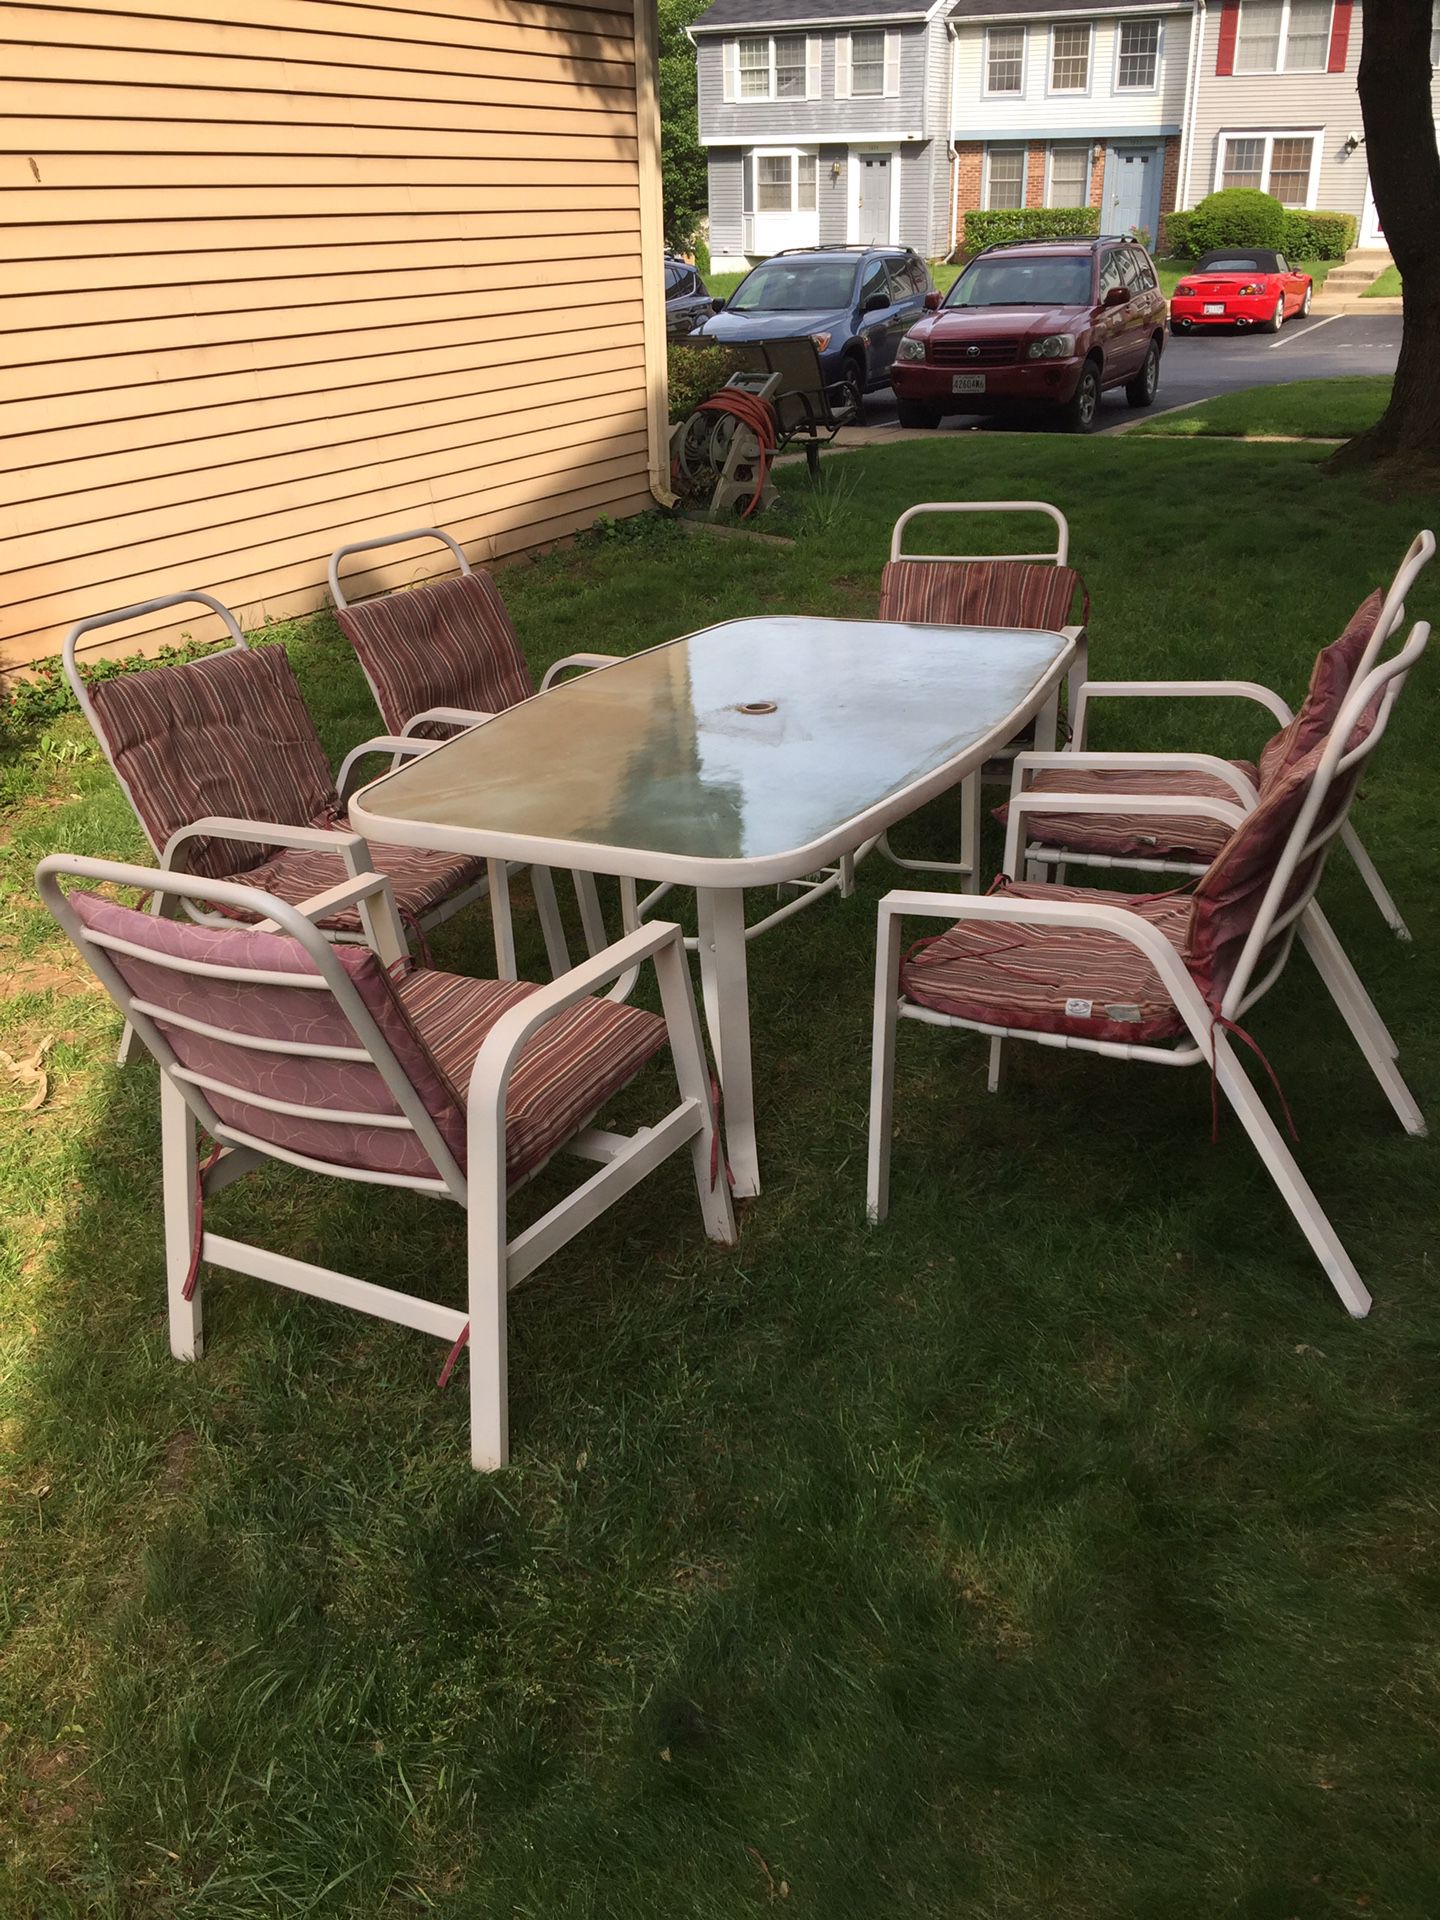 Big. Patio set for sale in very good condition Big table 6 chairs